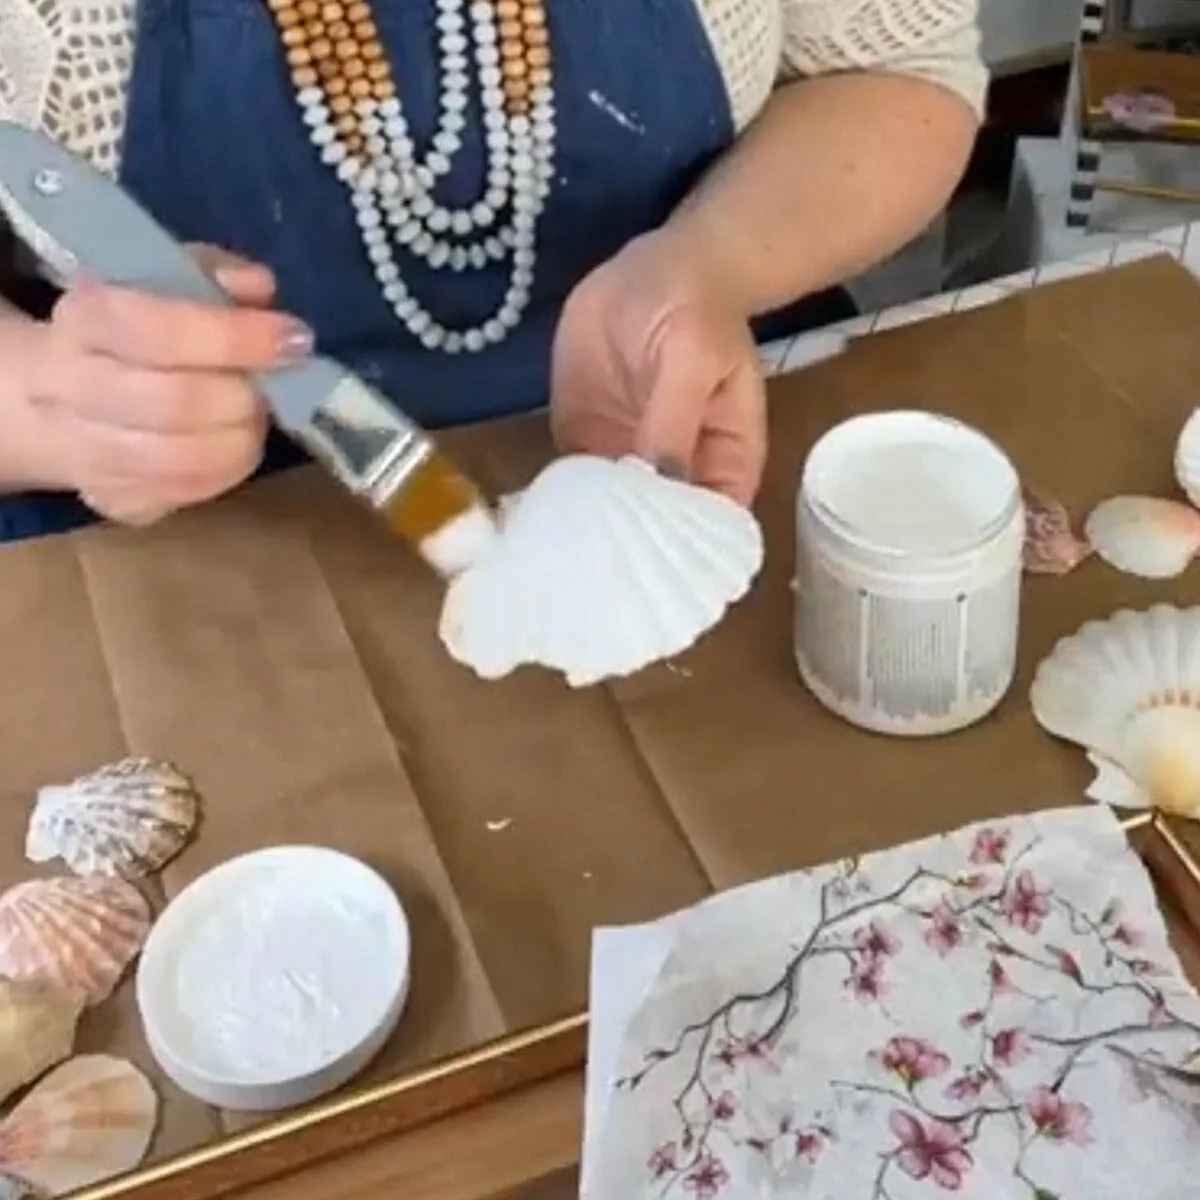 Painting a seashell